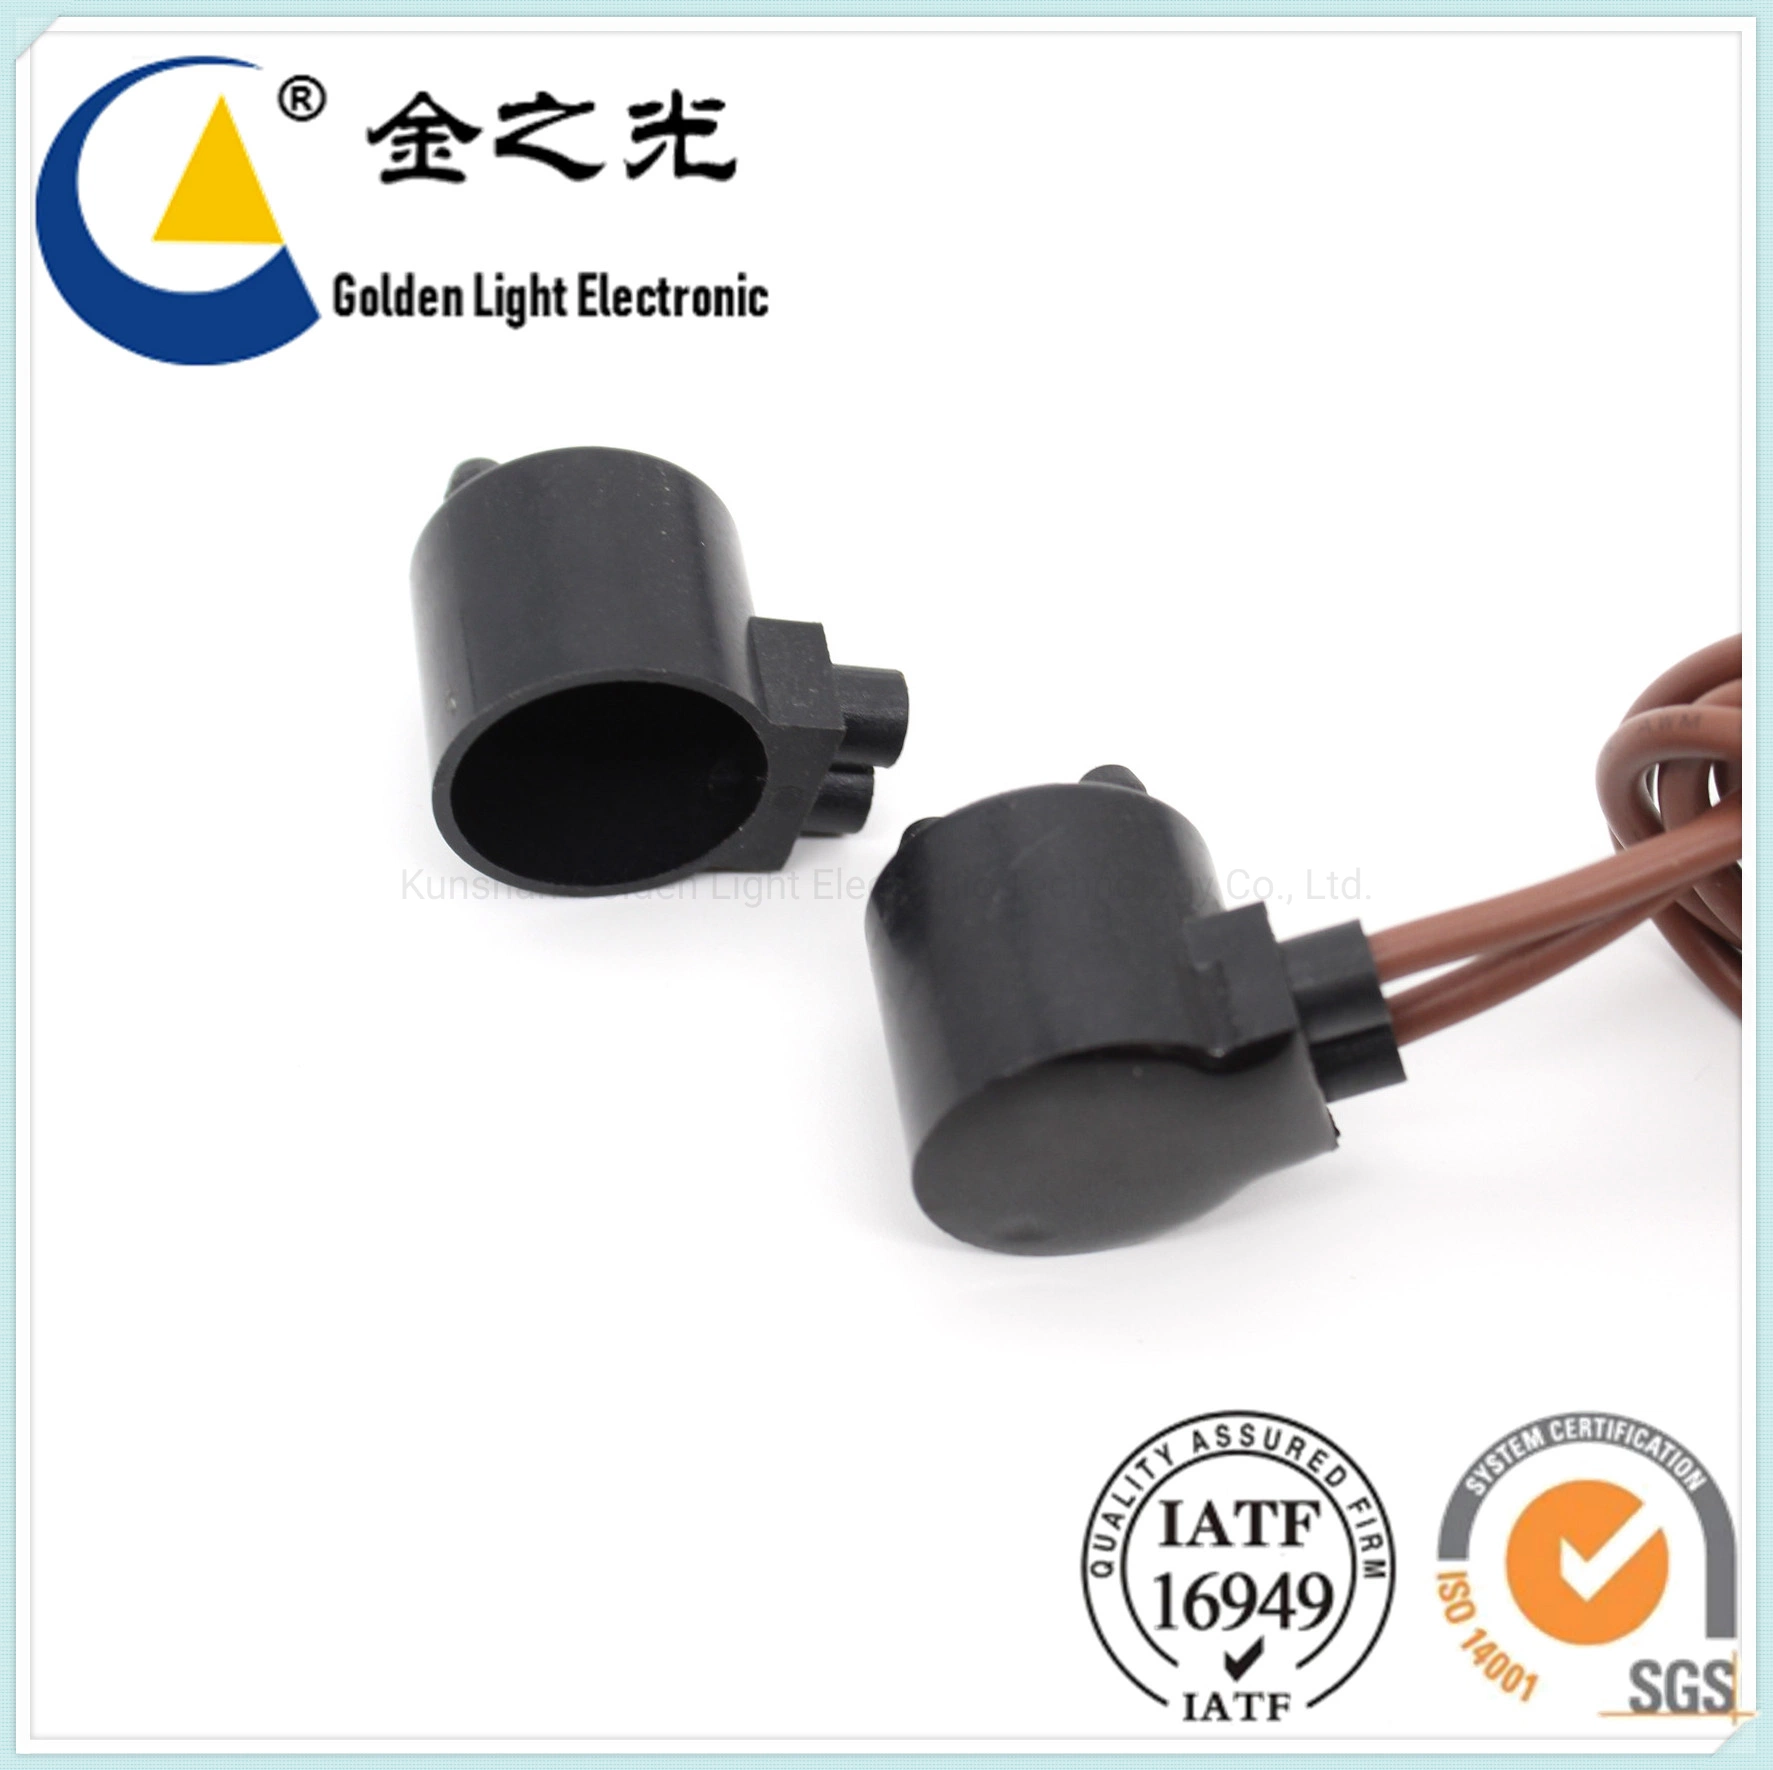 Magnetic Reed Switch Proximity Switch Sensor for Security and Safety Equipment